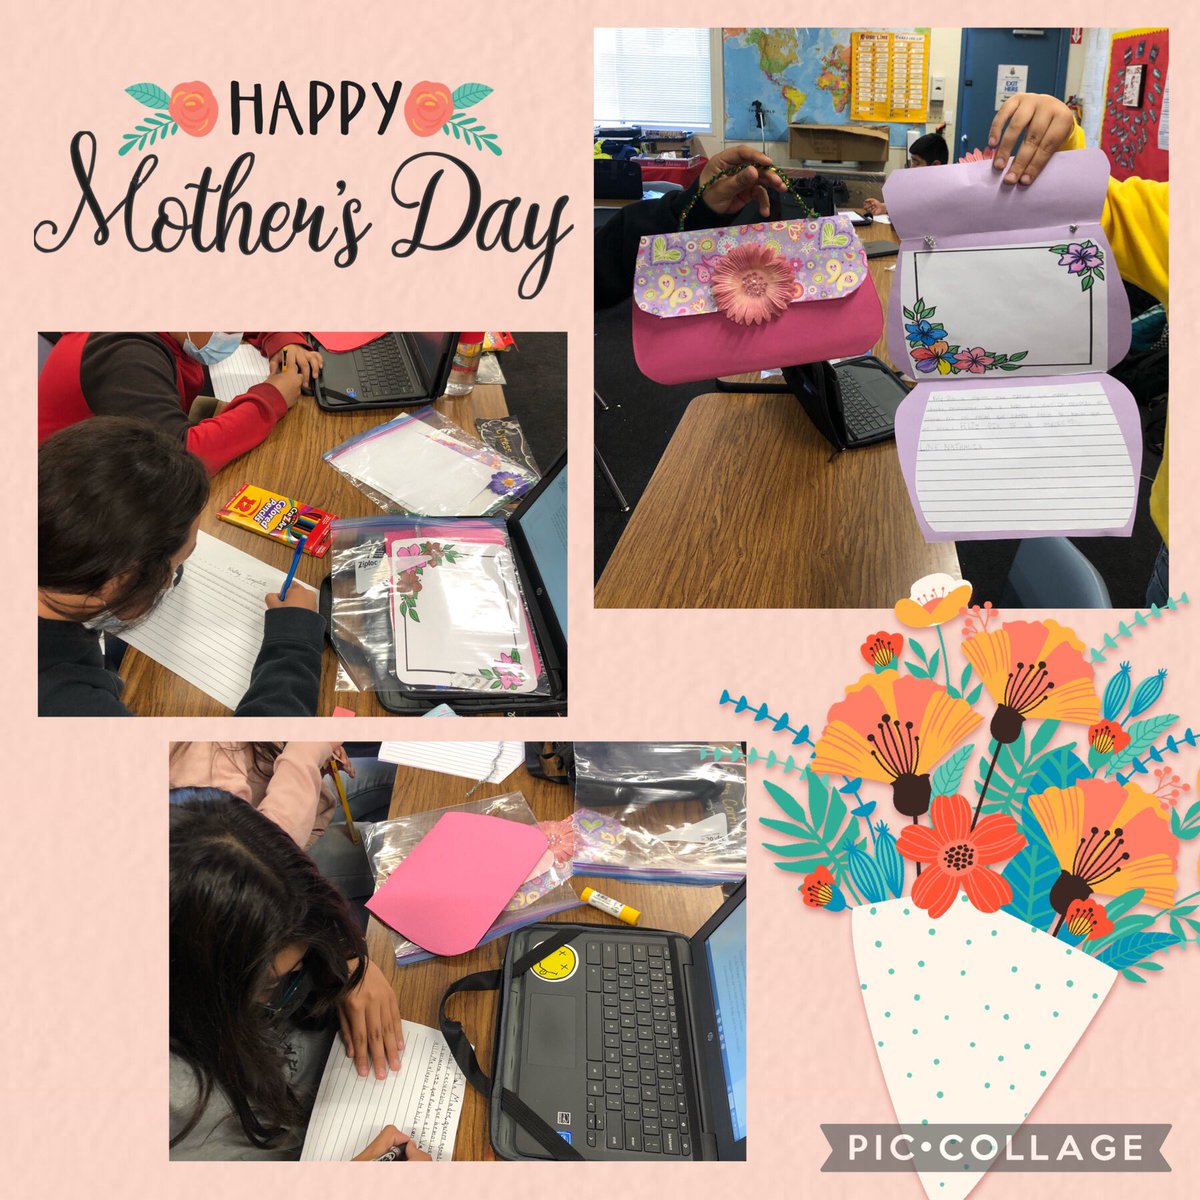 6th graders @YorbitaCheetah writing their moms a special message for Mother’s Day in a custom made purse. Our students would like to thank all of the moms out there for their hugs, words of encouragement, and acts of love you give every single day. @RowlandSchools #WeAreRUSD